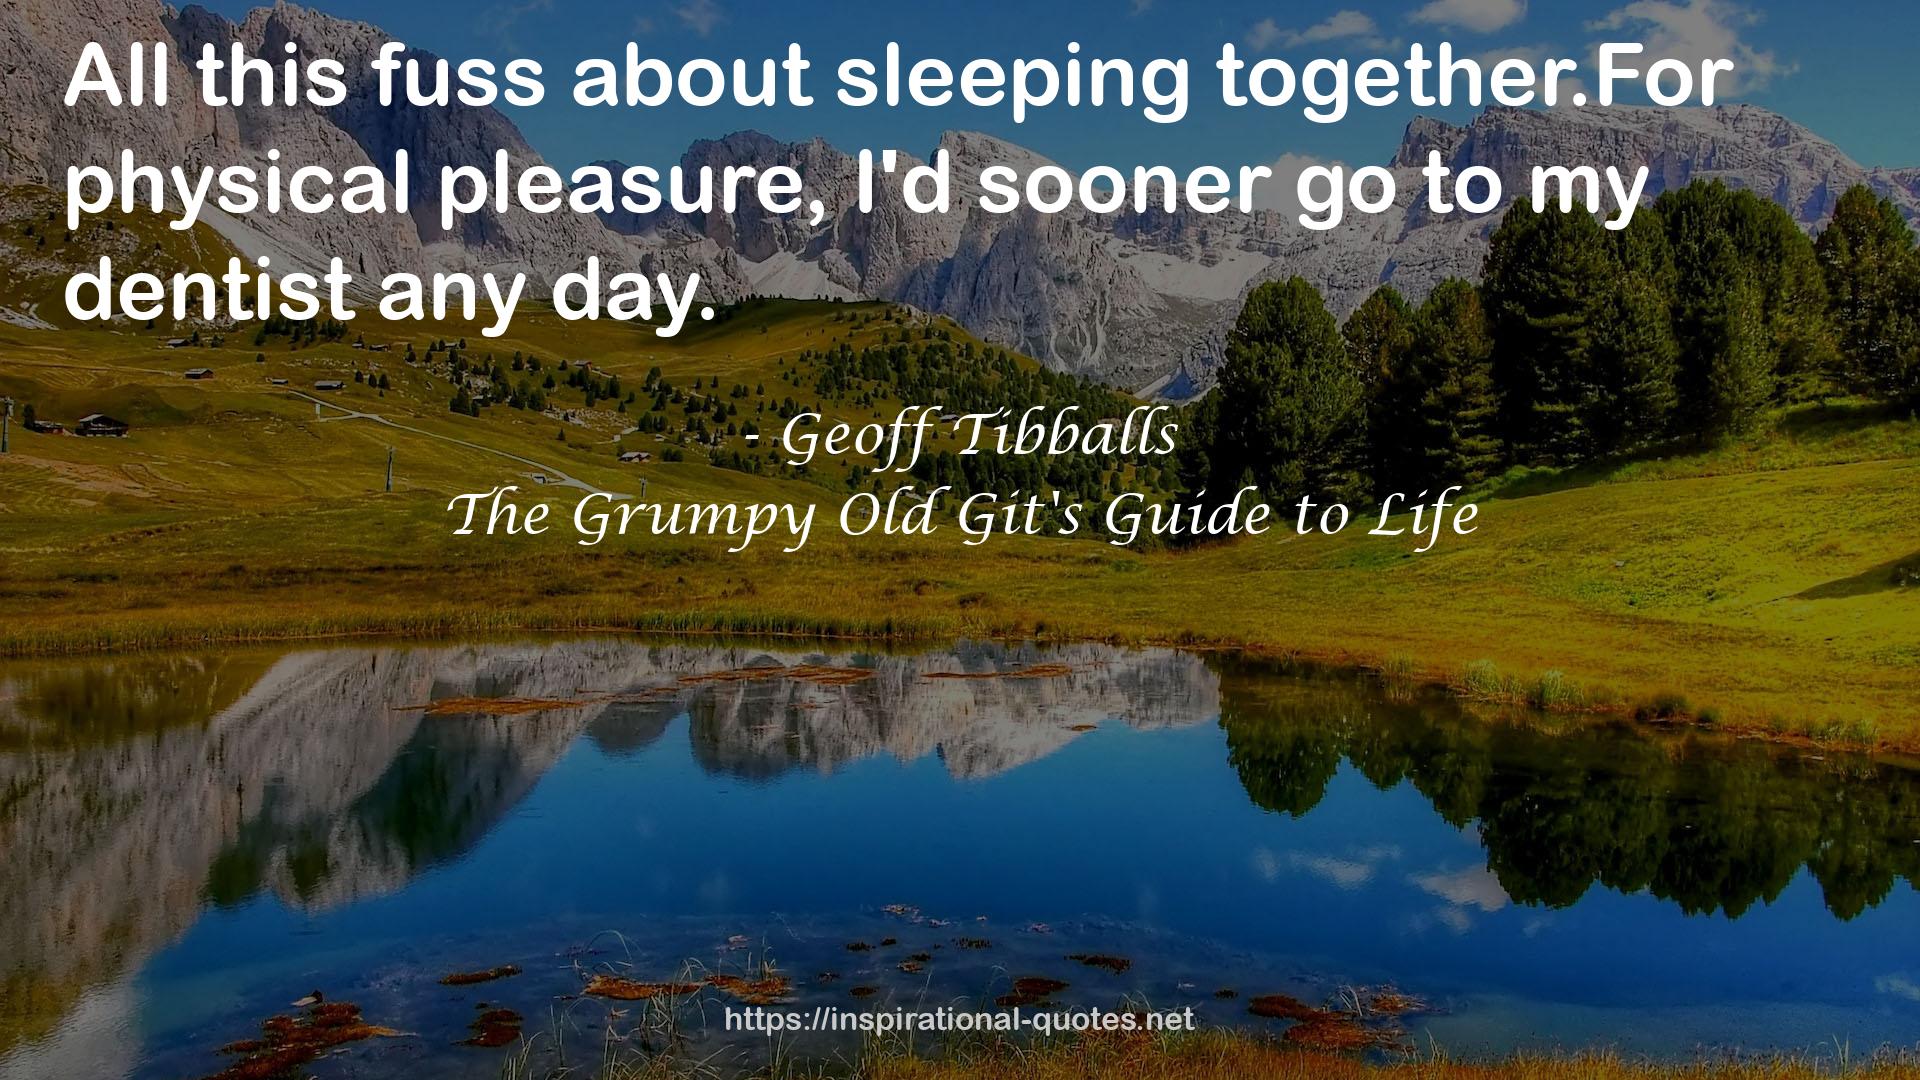 The Grumpy Old Git's Guide to Life QUOTES